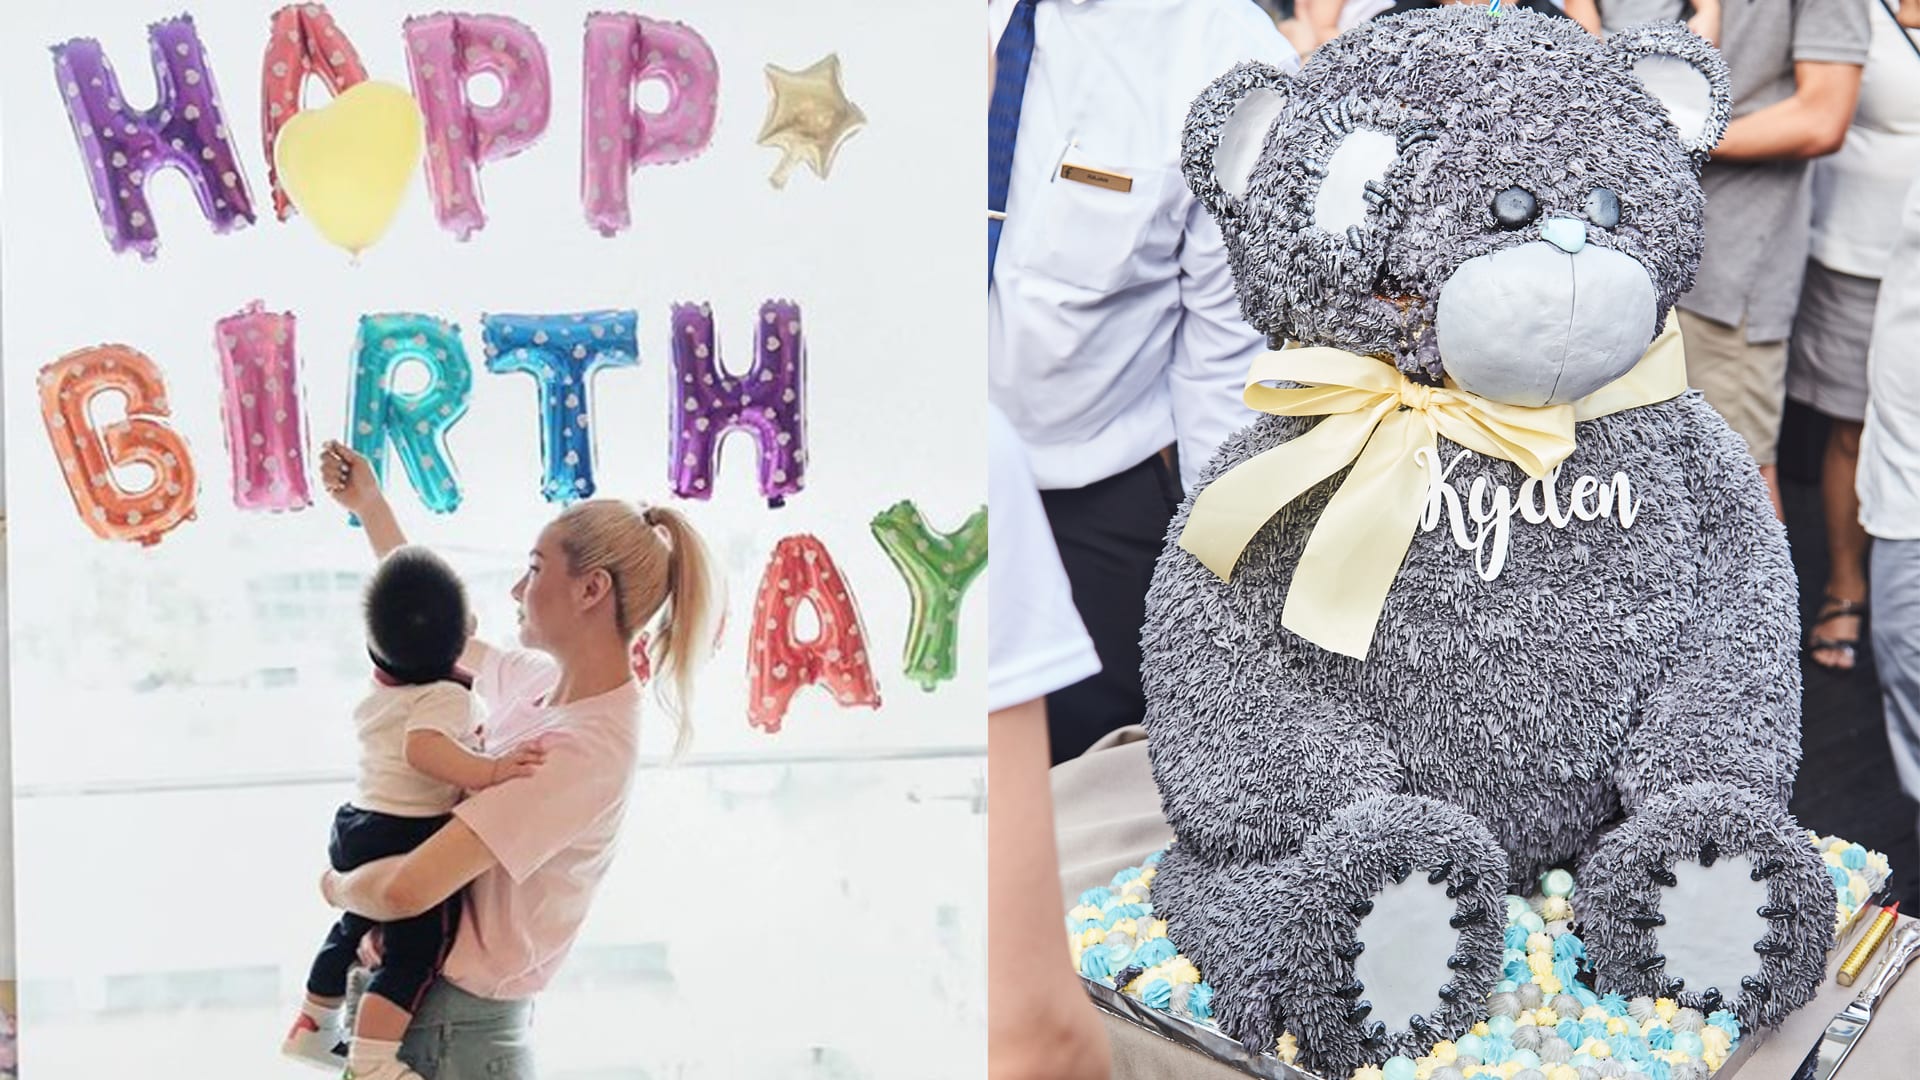 Kim Lim Threw A Super Cute Birthday Party For Her Son And We Have The Photos